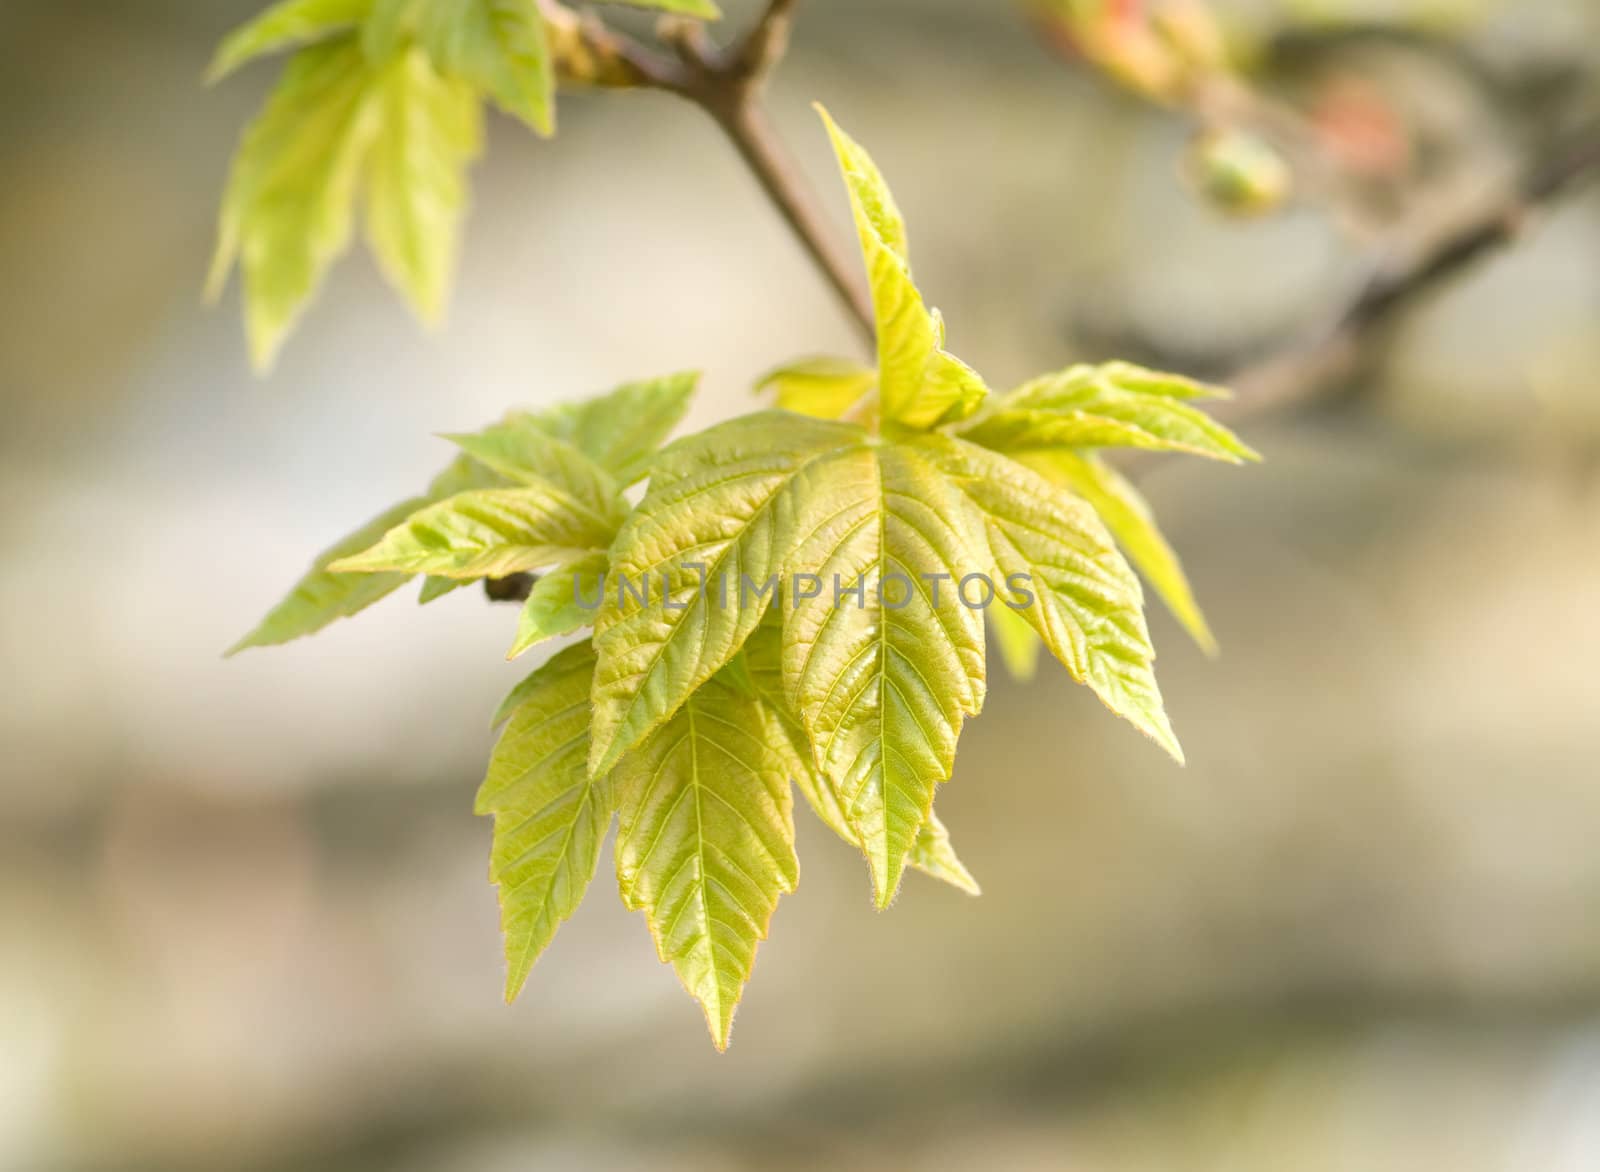 maple tree branch with spring buds and young leaves, macro by motorolka